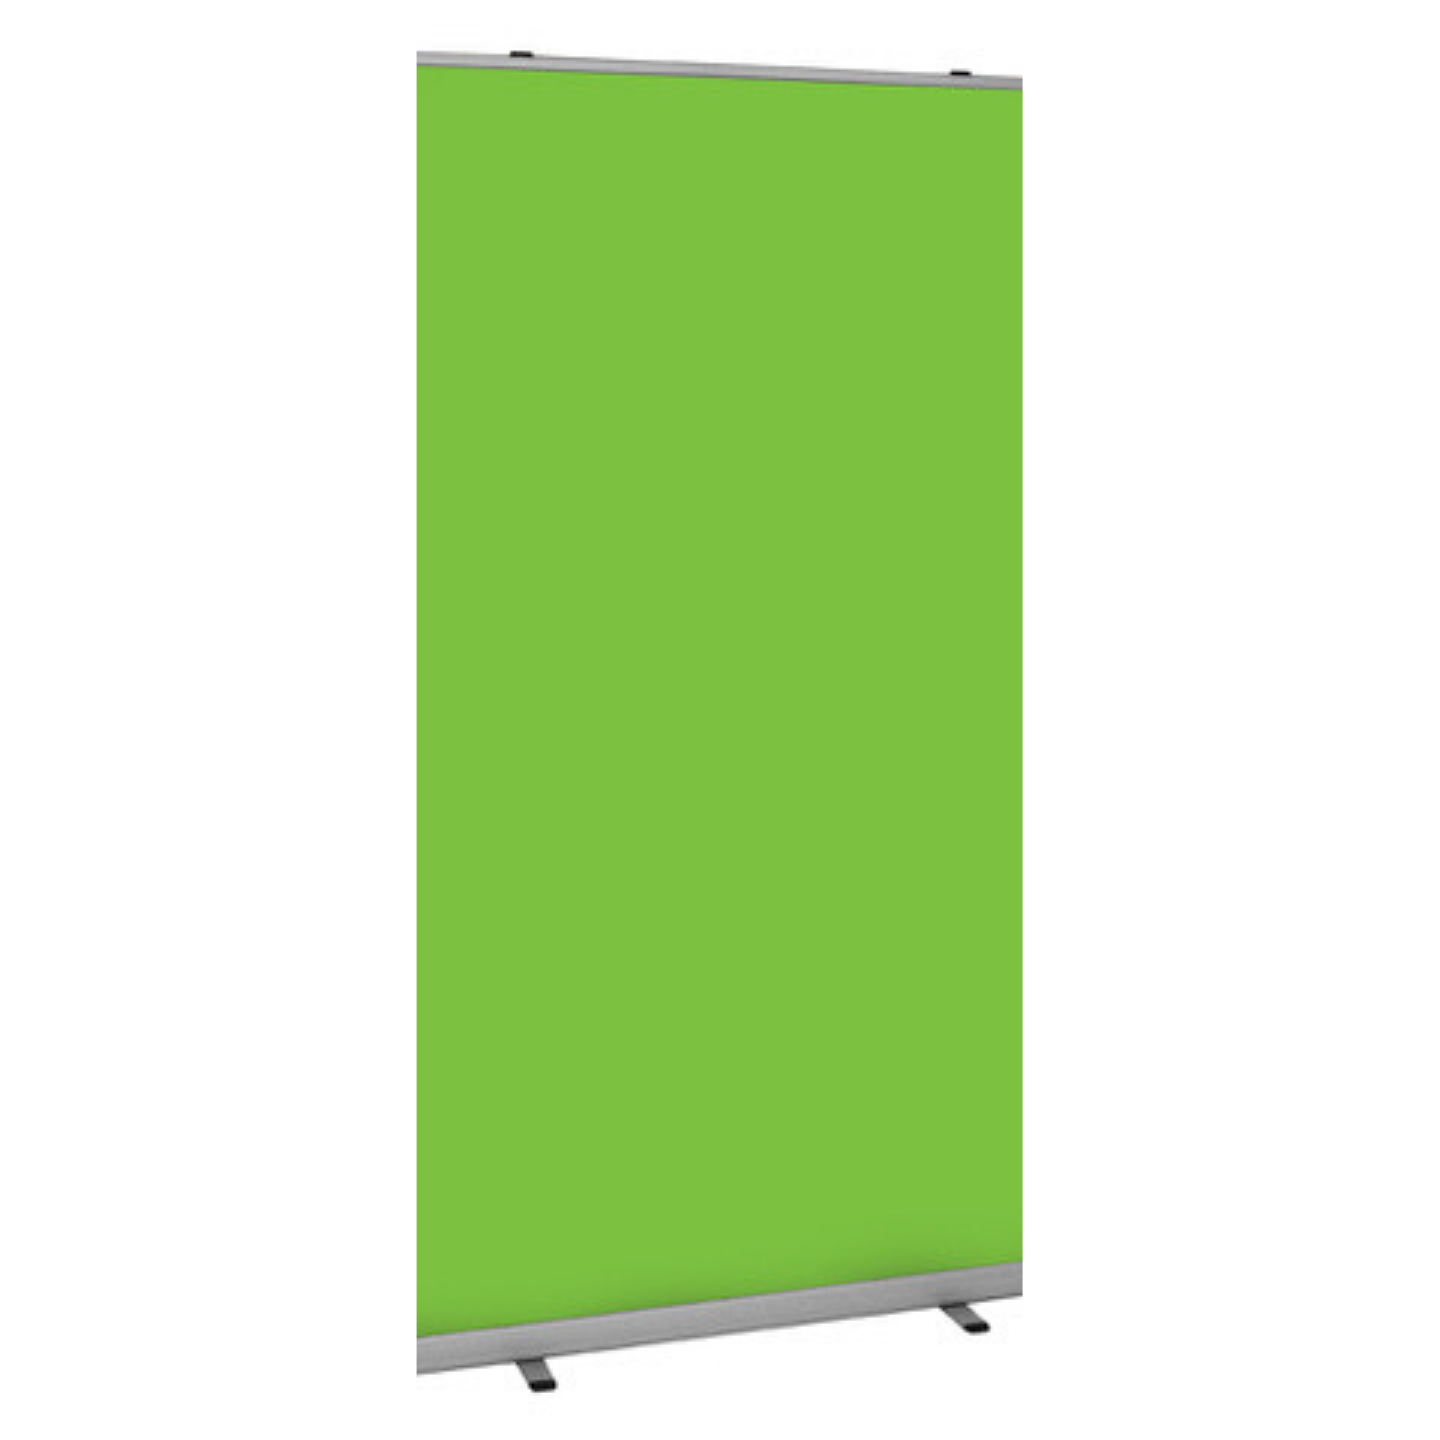 Mosquito 1200 Retractable Banner Stand with Green Screen